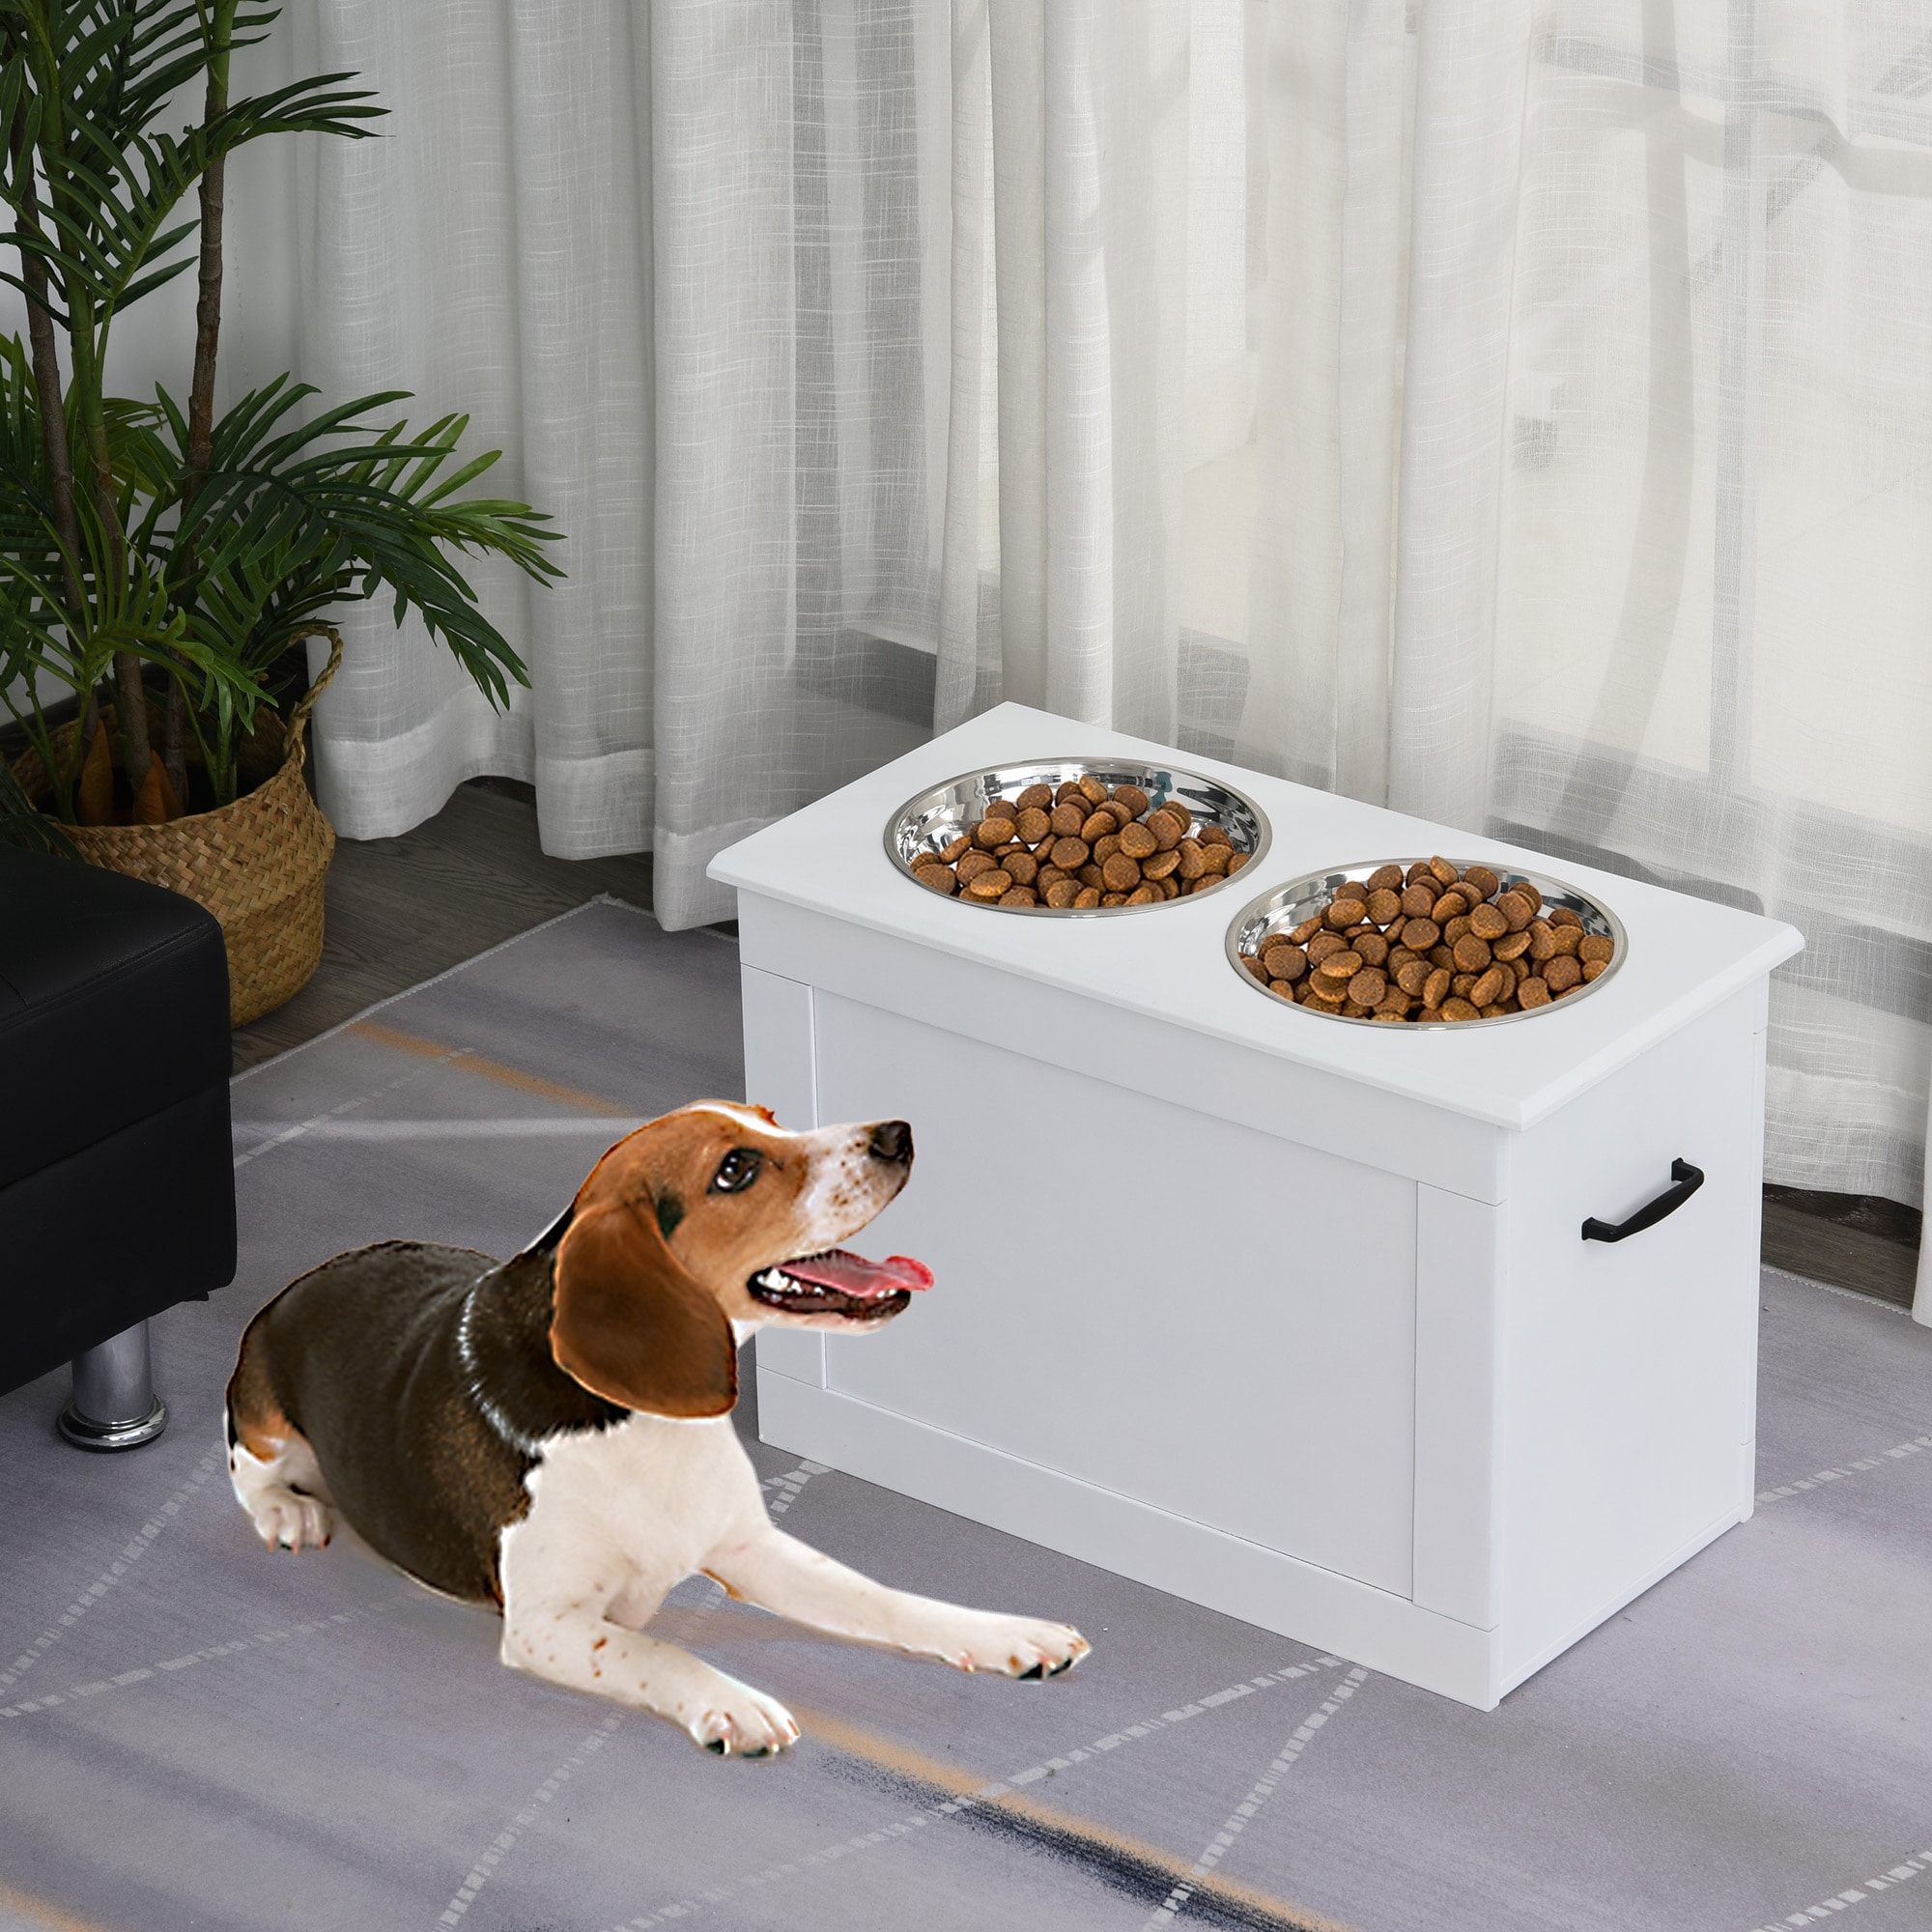 https://ak1.ostkcdn.com/images/products/is/images/direct/cdd8879cfa46cf2da8f1bef0fe2904316794e547/PawHut-Raised-Pet-Feeding-Storage-Station-with-2-Stainless-Steel-Bowls-Base-for-Large-Dogs-and-Other-Large-Pets.jpg